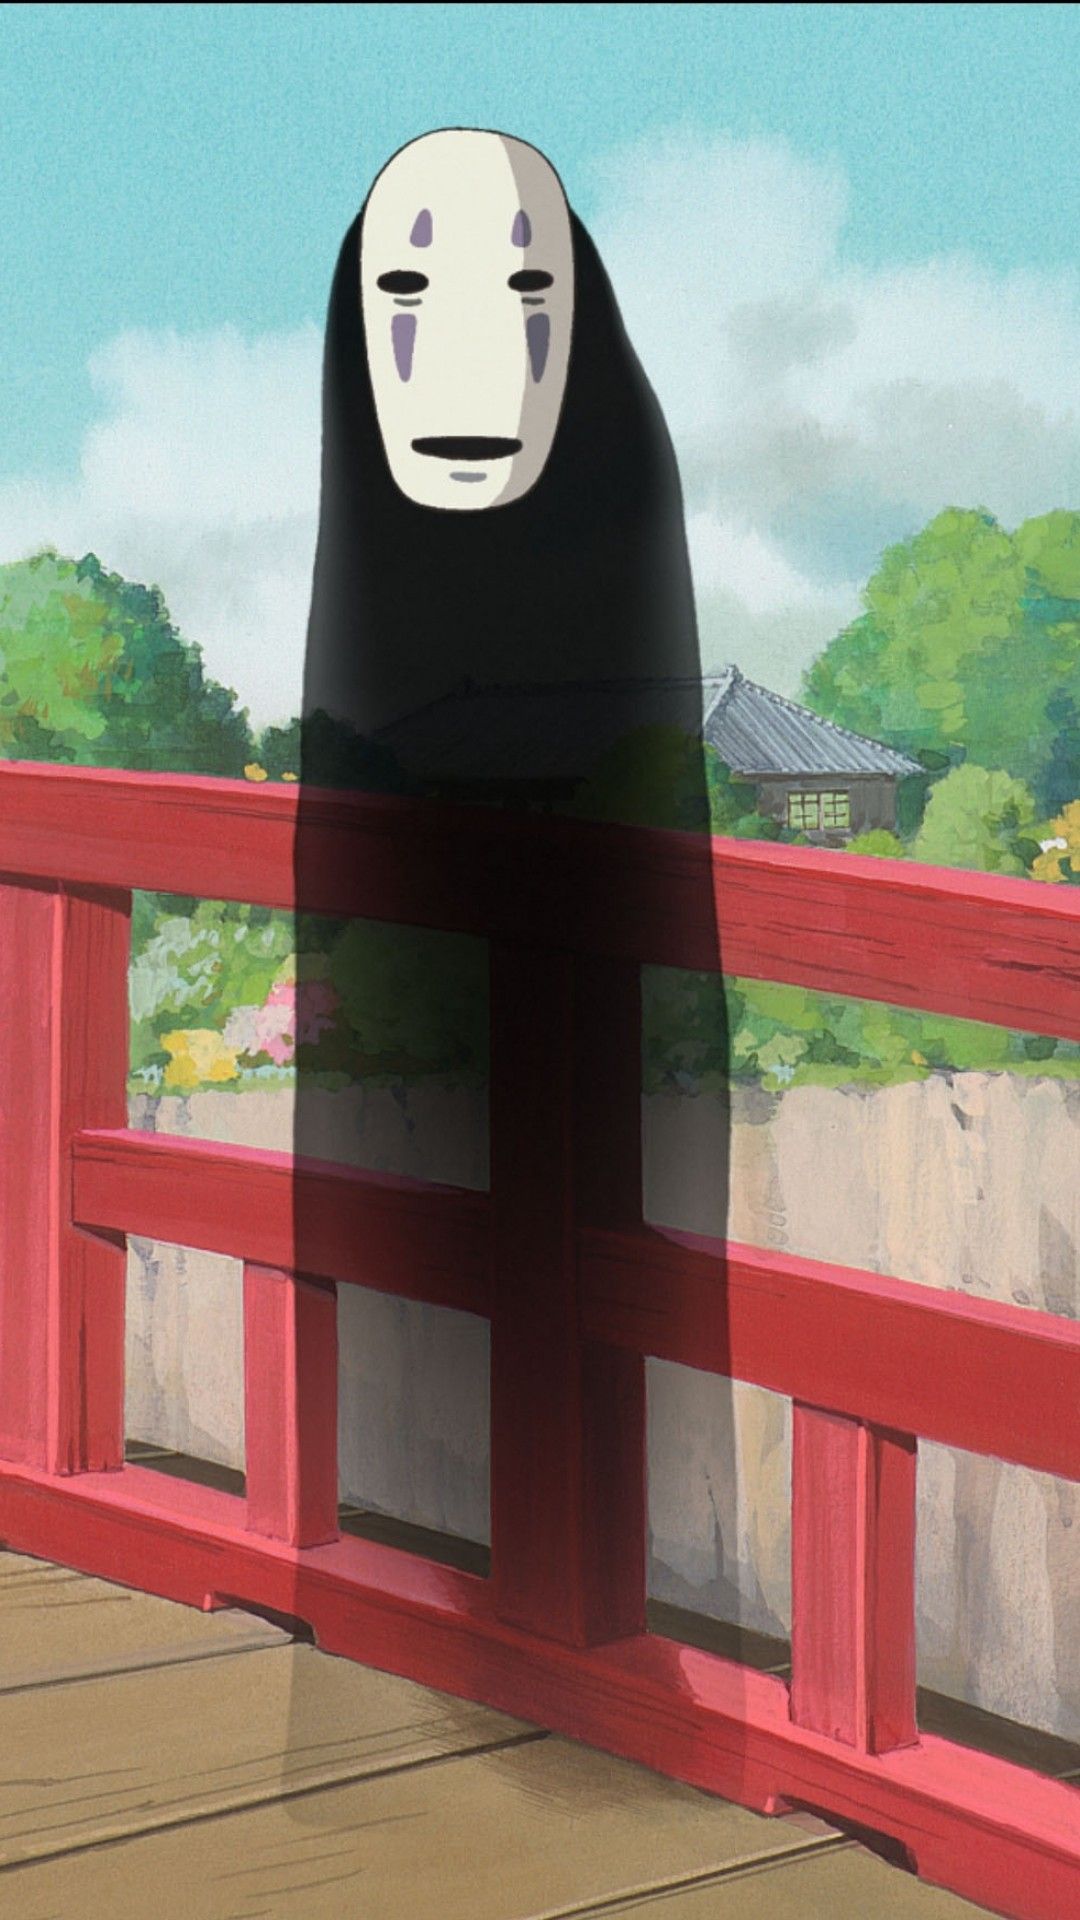 6 NoFace Spirited Away Phone Wallpapers  Mobile Abyss